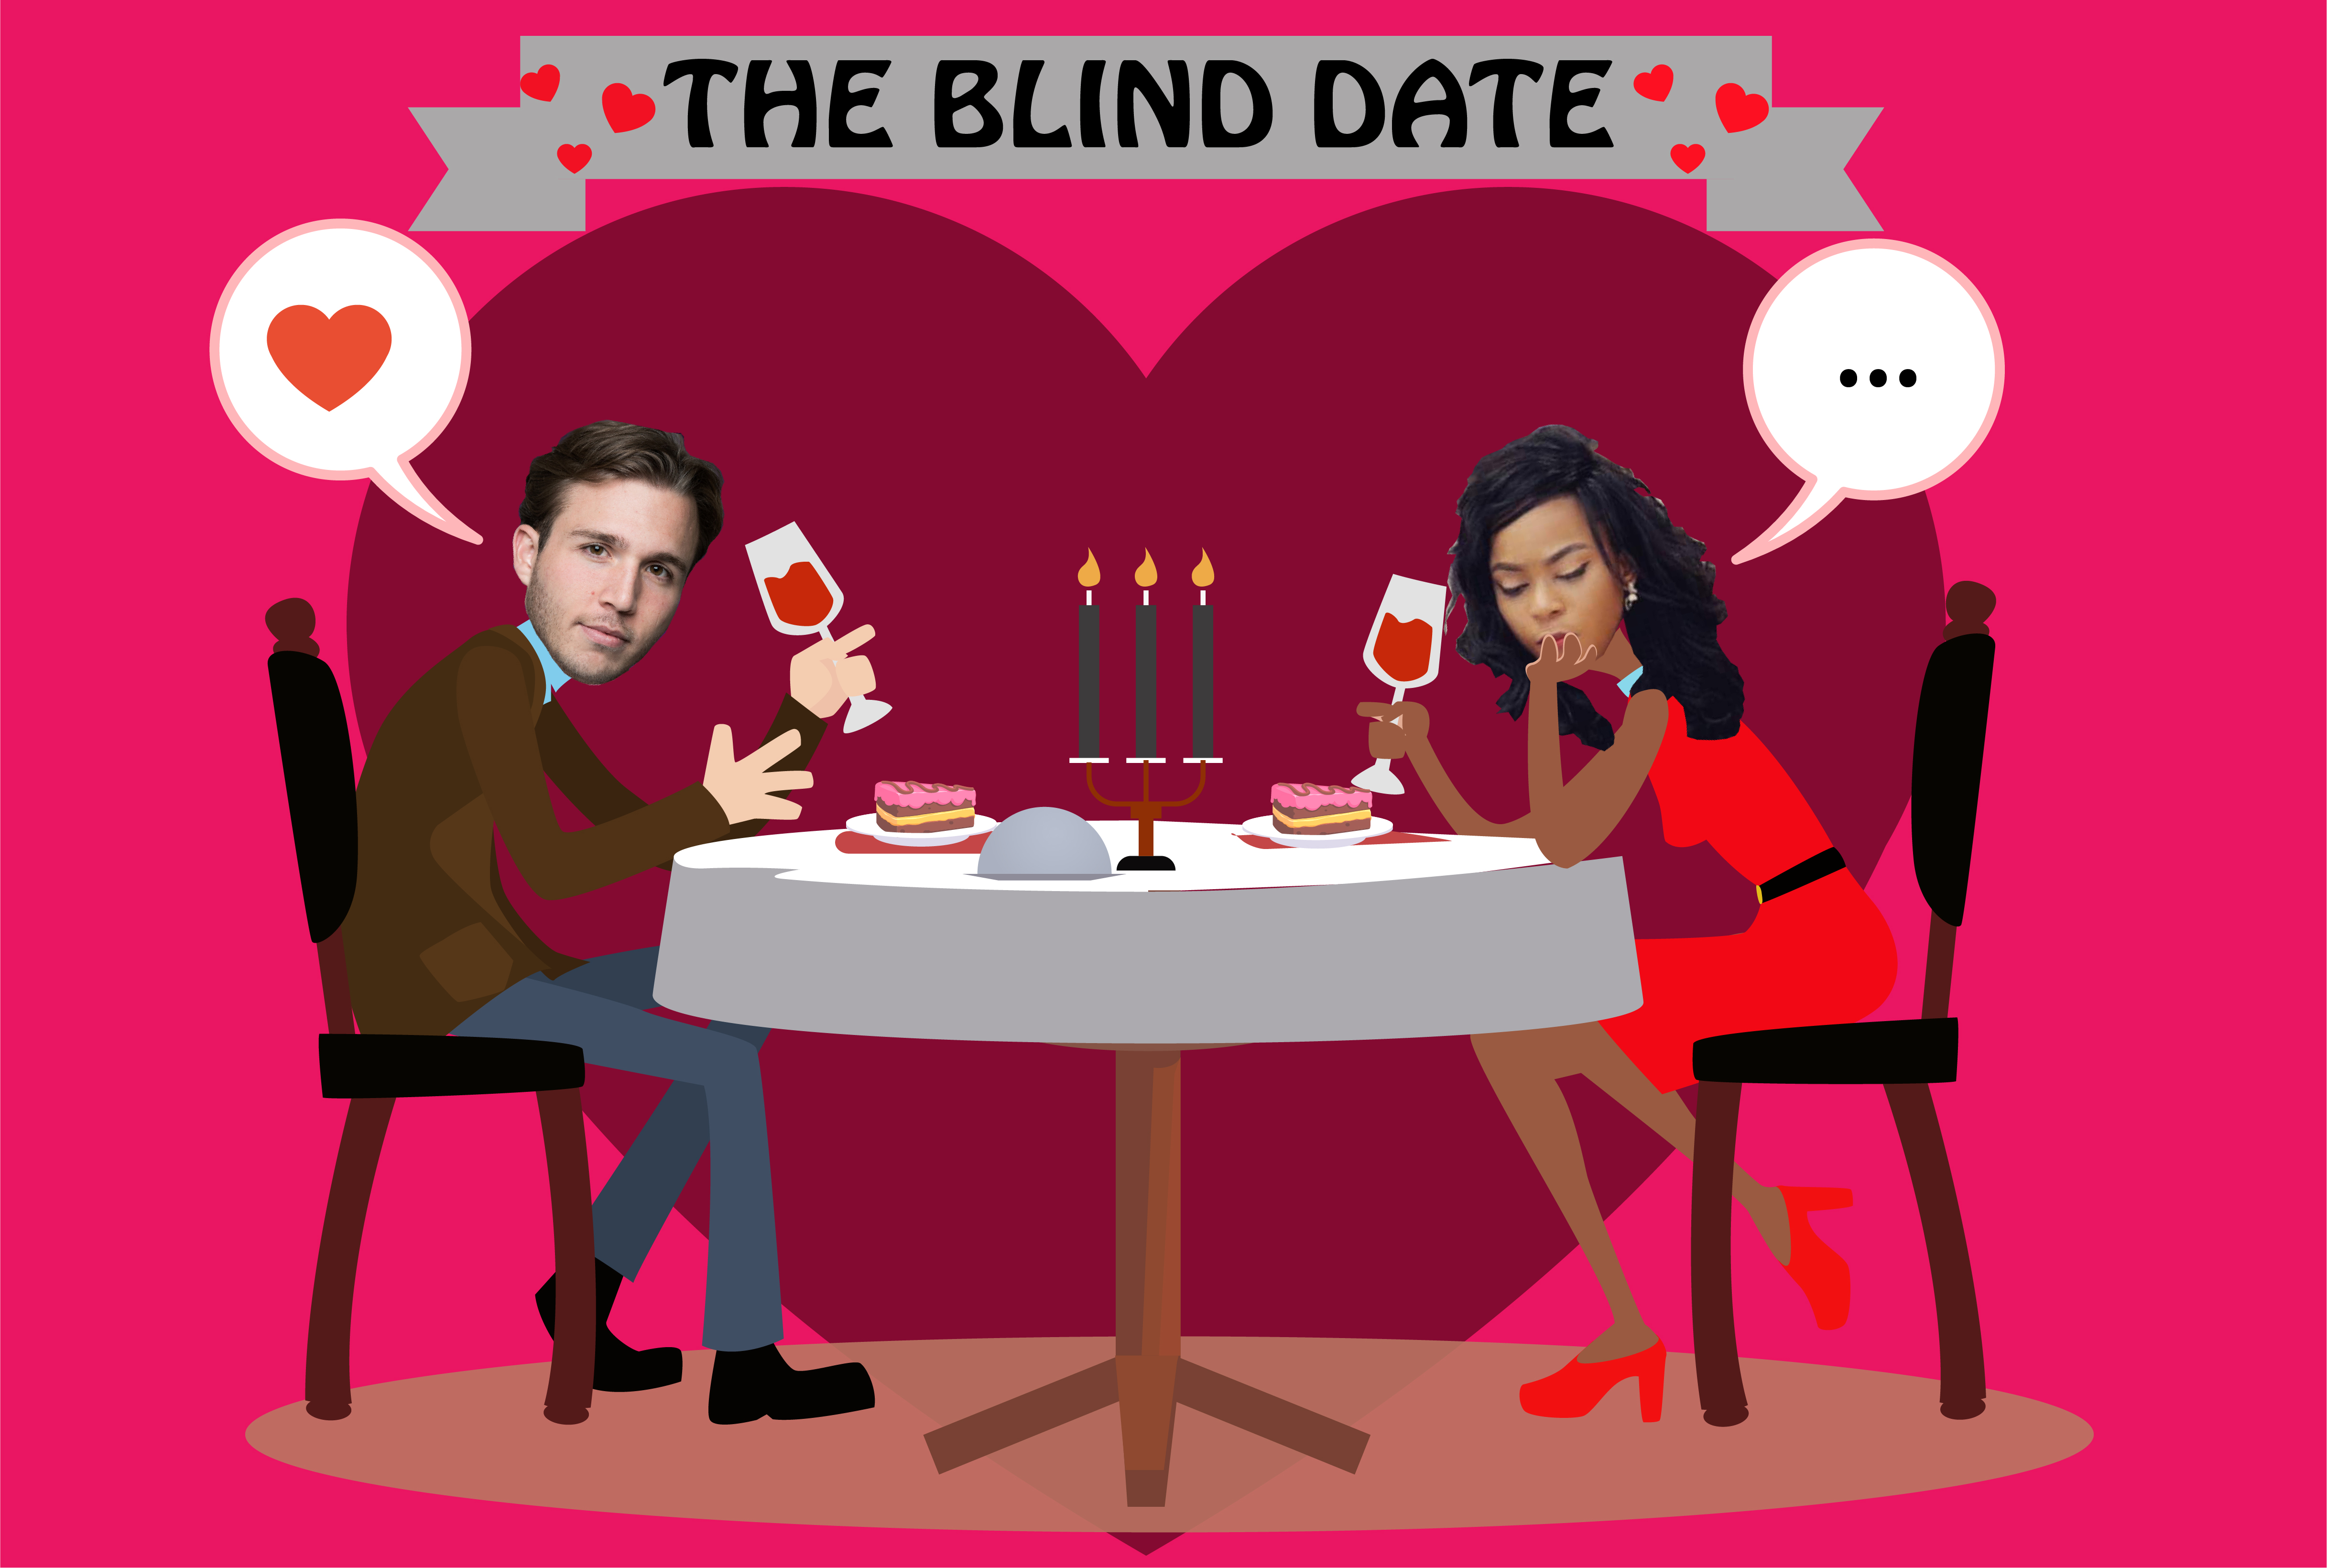 Blind date contest organized by Dimimp - Steemit.